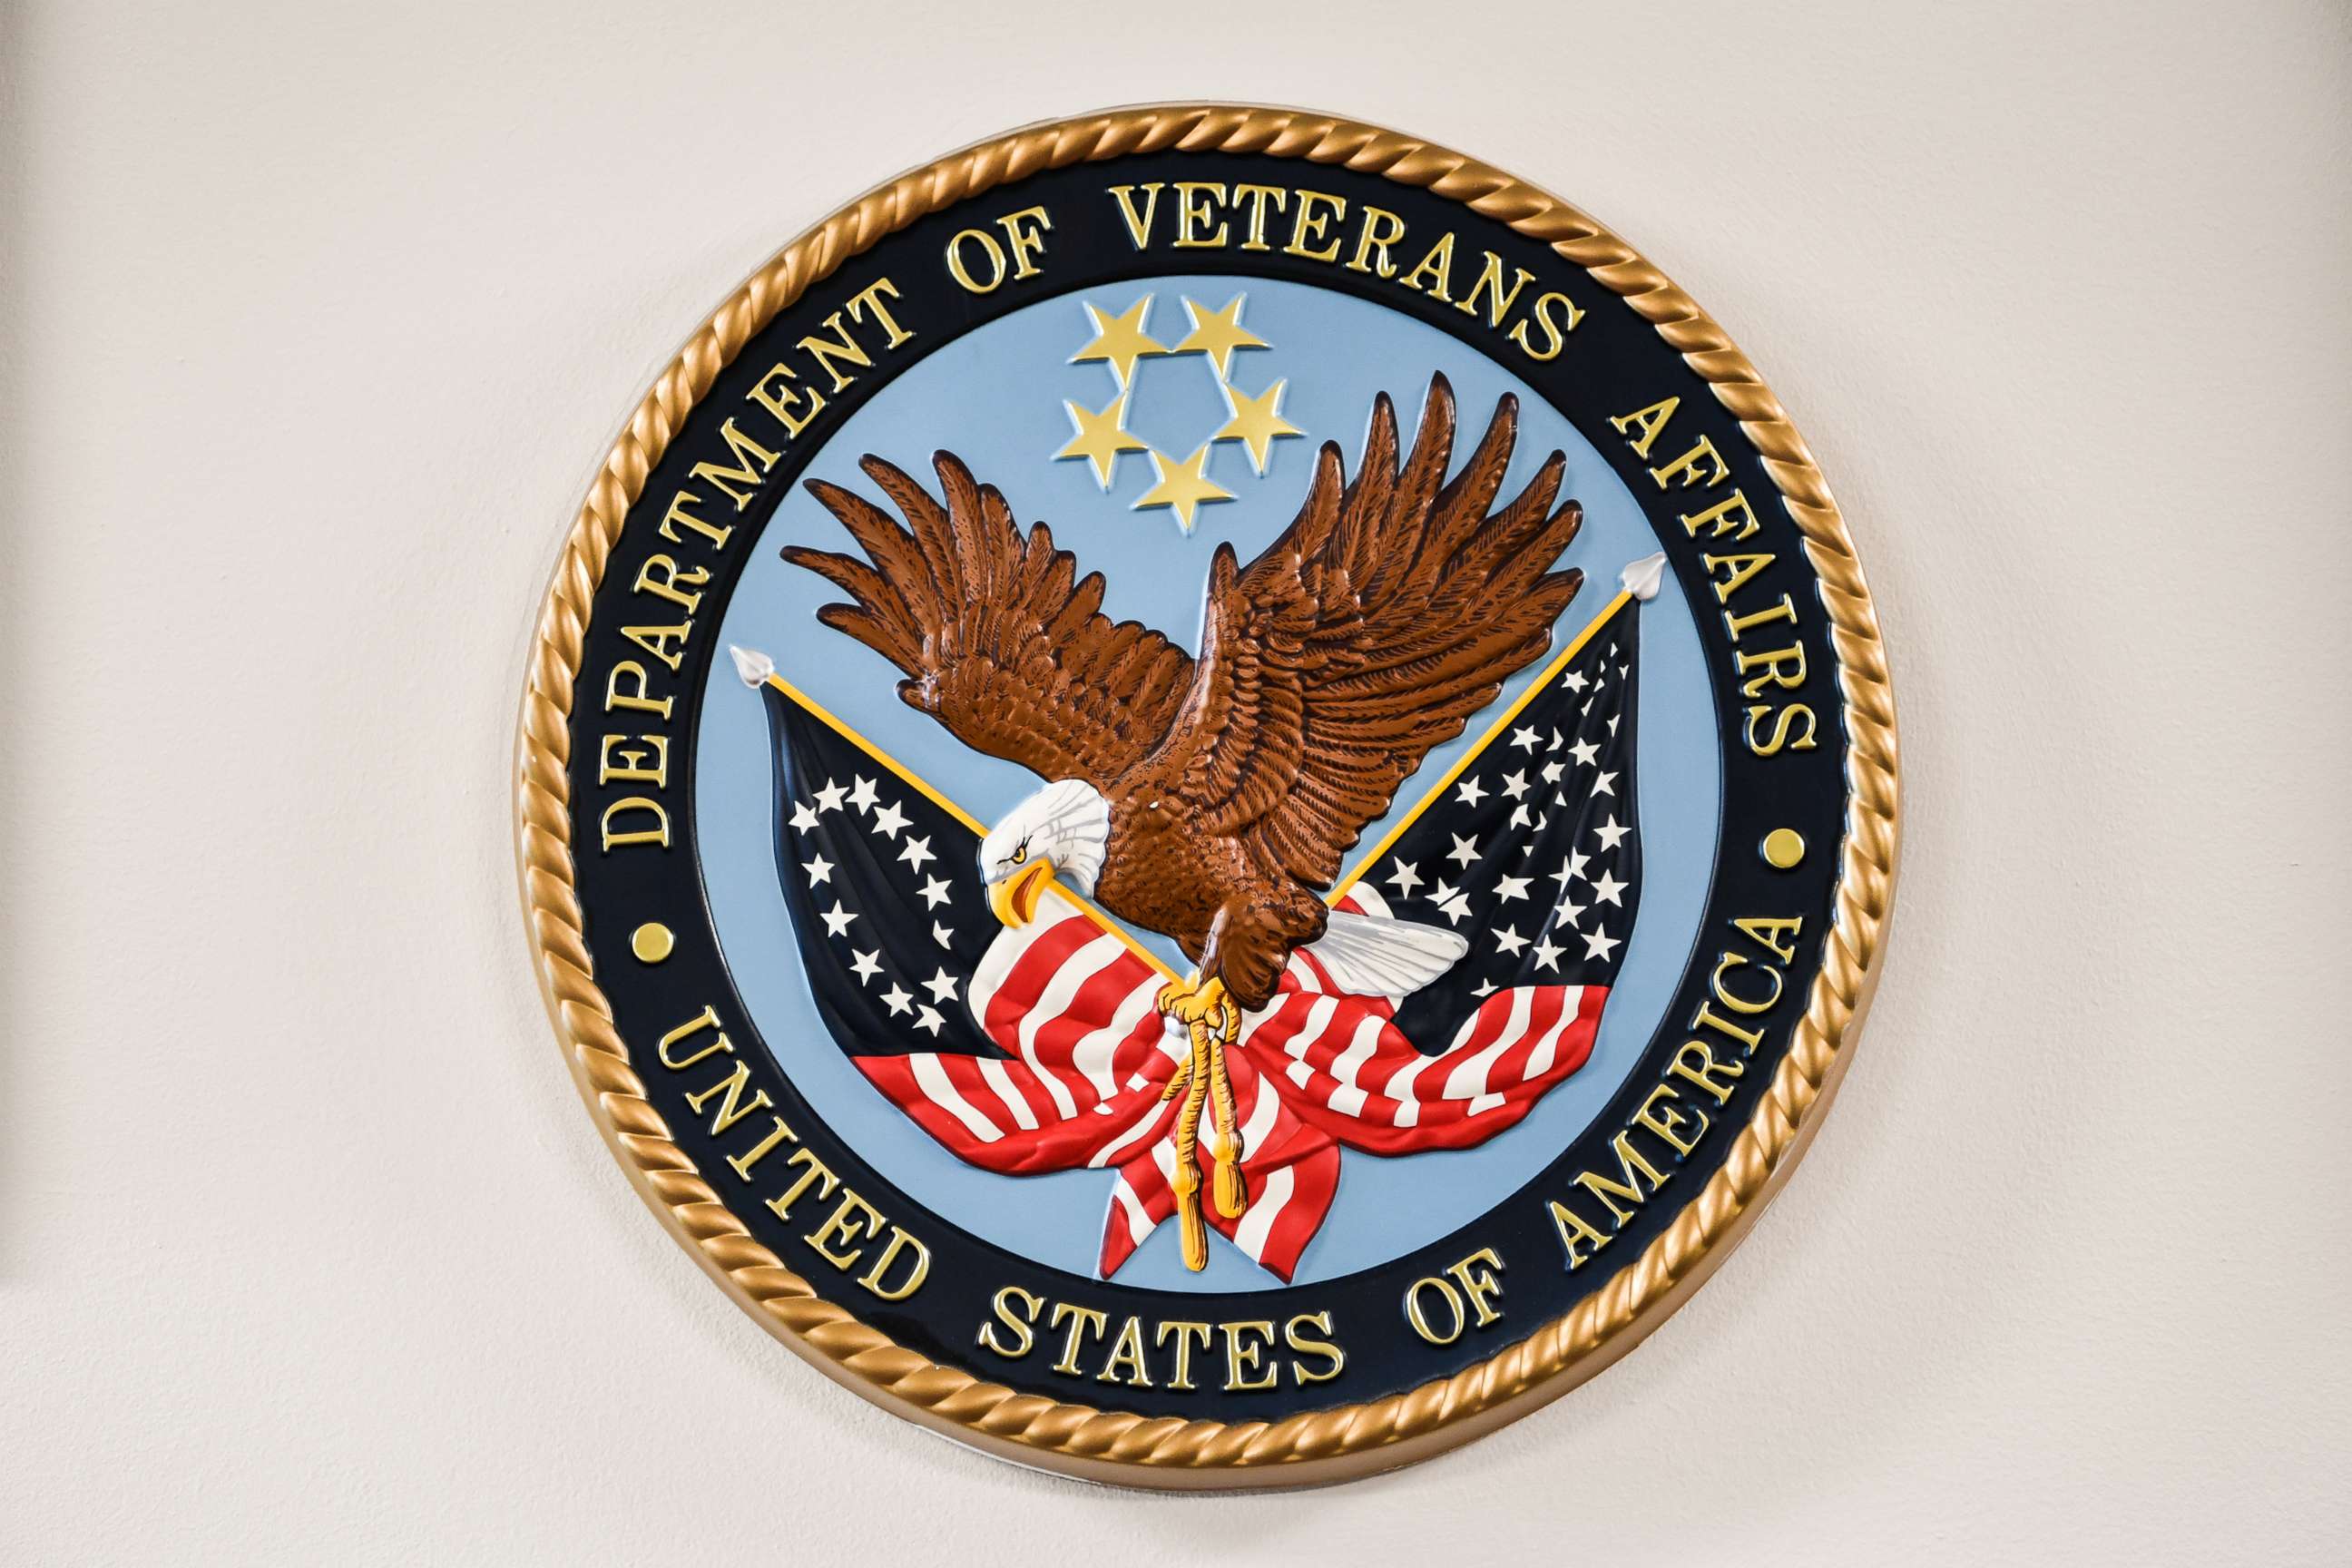 PHOTO: The logo of the U.S. Department of Veterans Affairs, Sept. 8, 2017, at the Department of Veterans Affairs office in Washington, D.C.